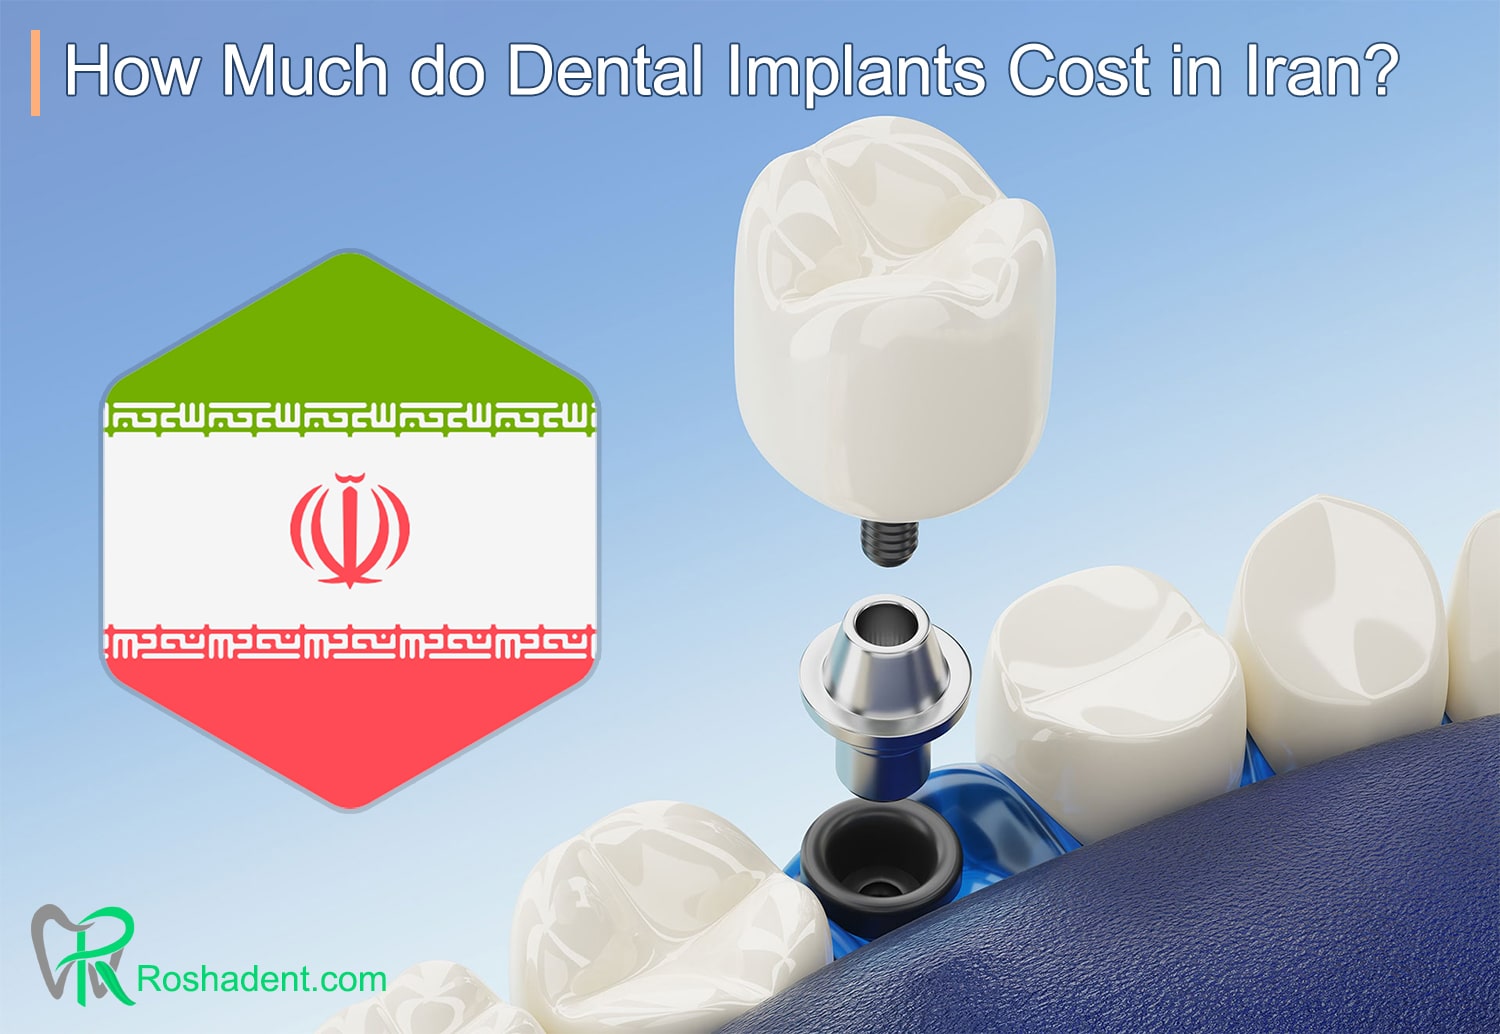 How Much do Dental Implants Cost in Iran?